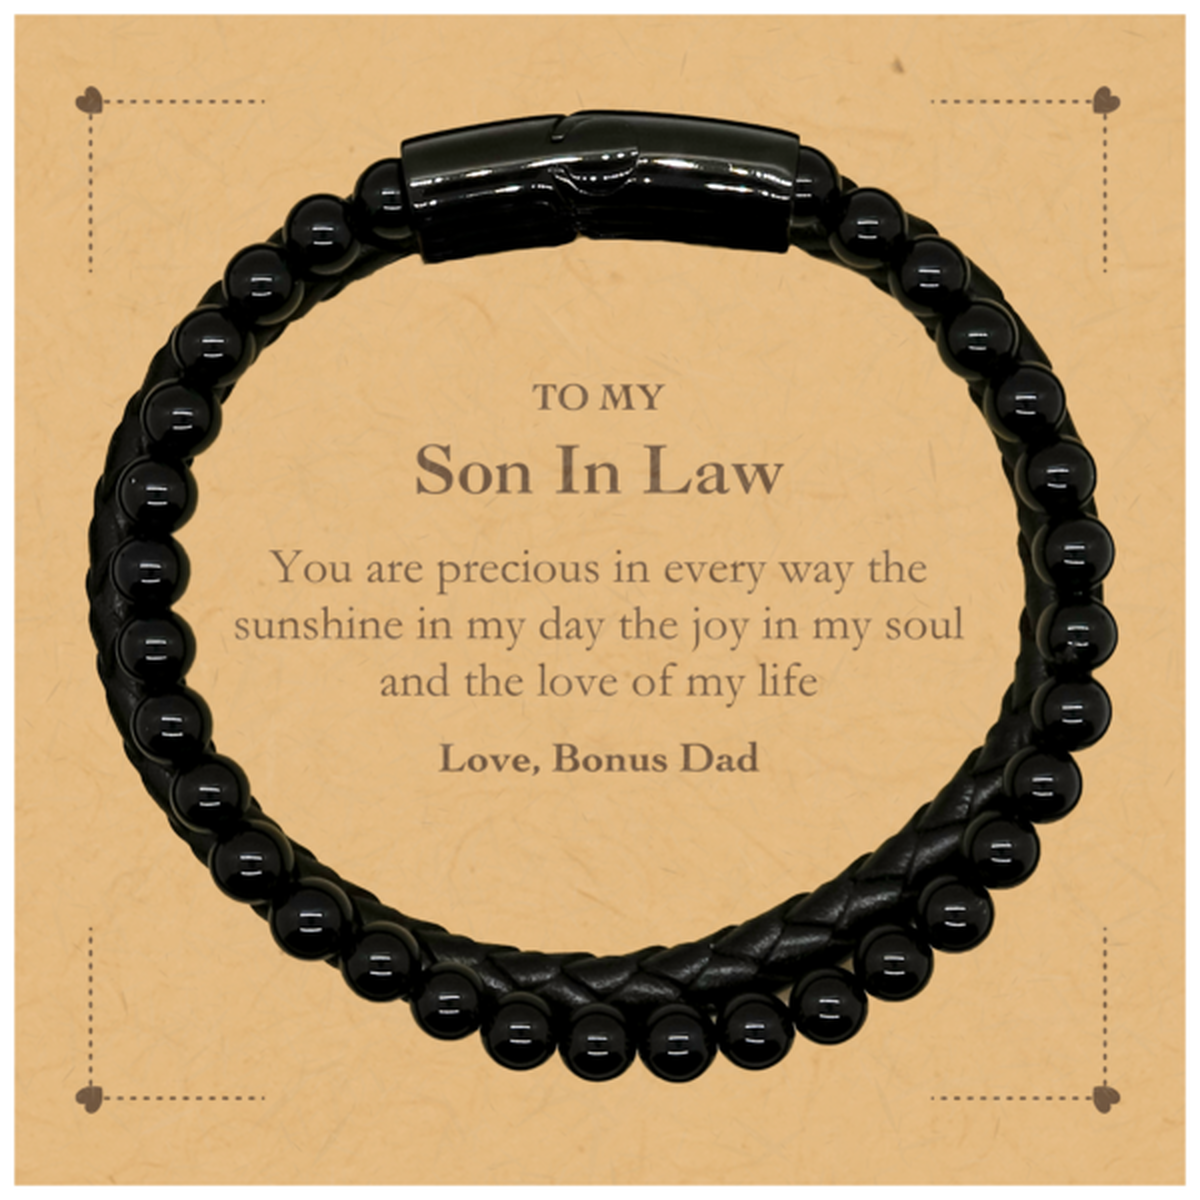 Graduation Gifts for Son In Law Stone Leather Bracelets Present from Bonus Dad, Christmas Son In Law Birthday Gifts Son In Law You are precious in every way the sunshine in my day. Love, Bonus Dad